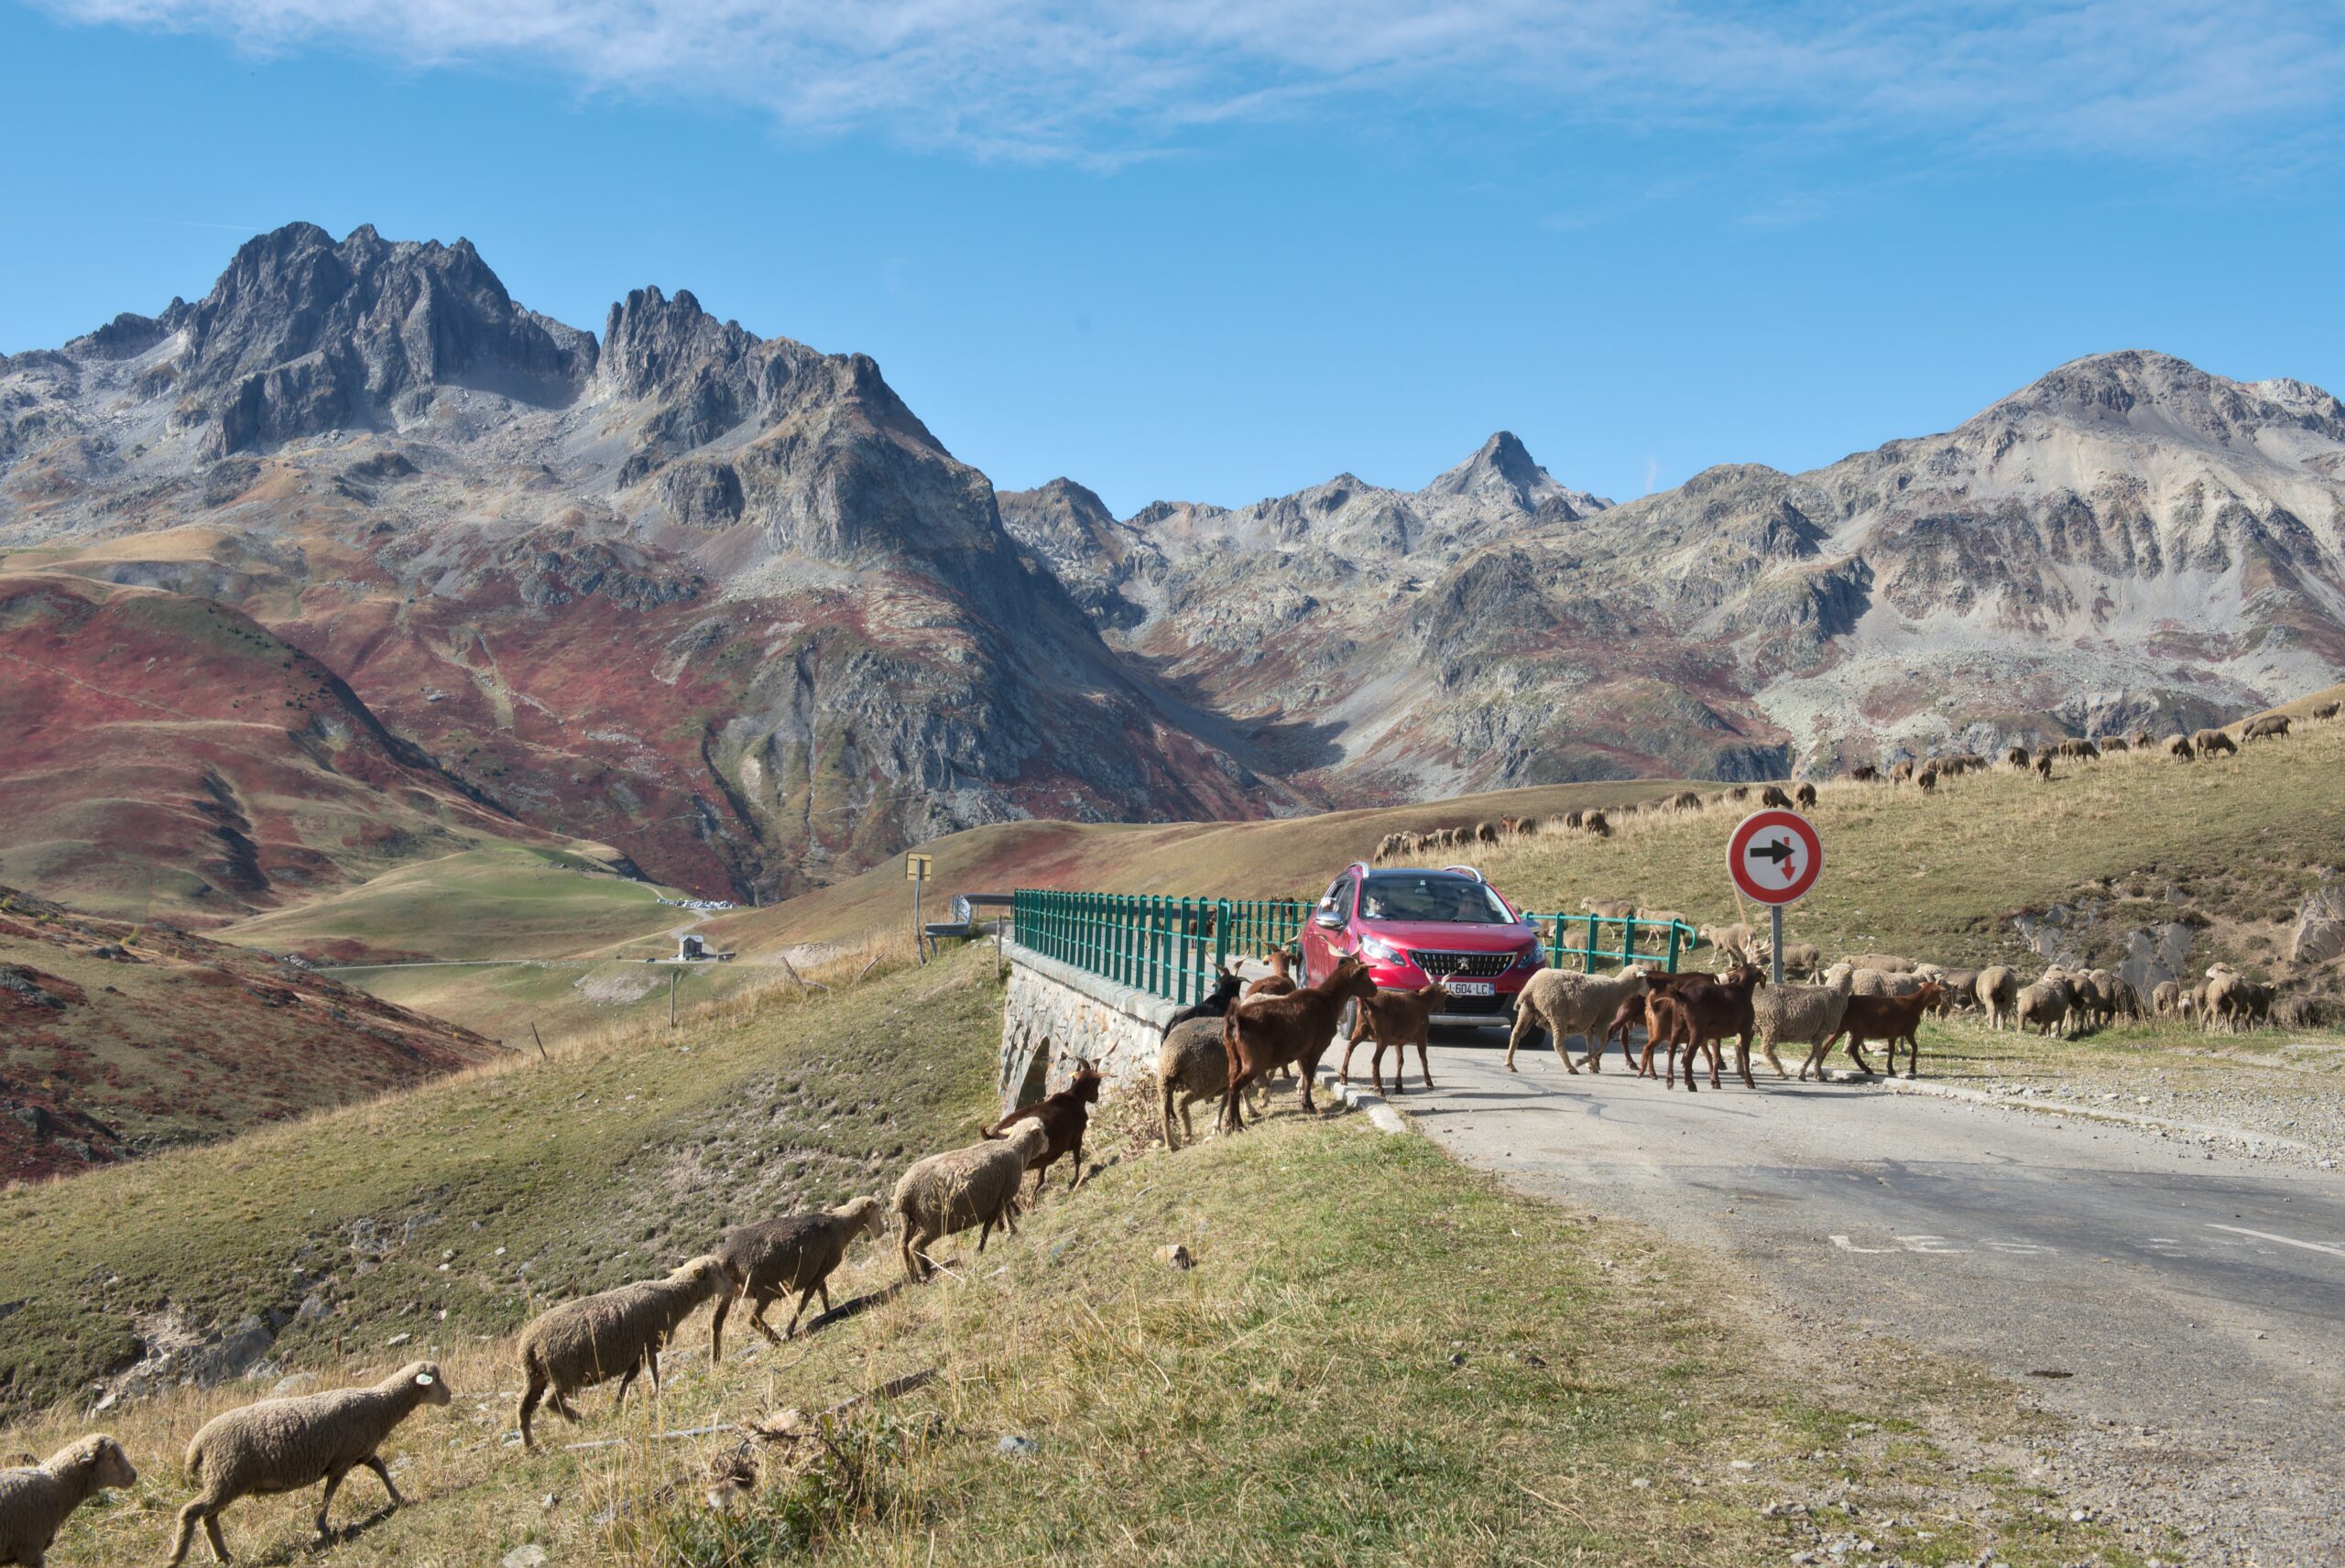 A mountain road with a red car stopped to allow a herd of sheep to cross the road in single file.